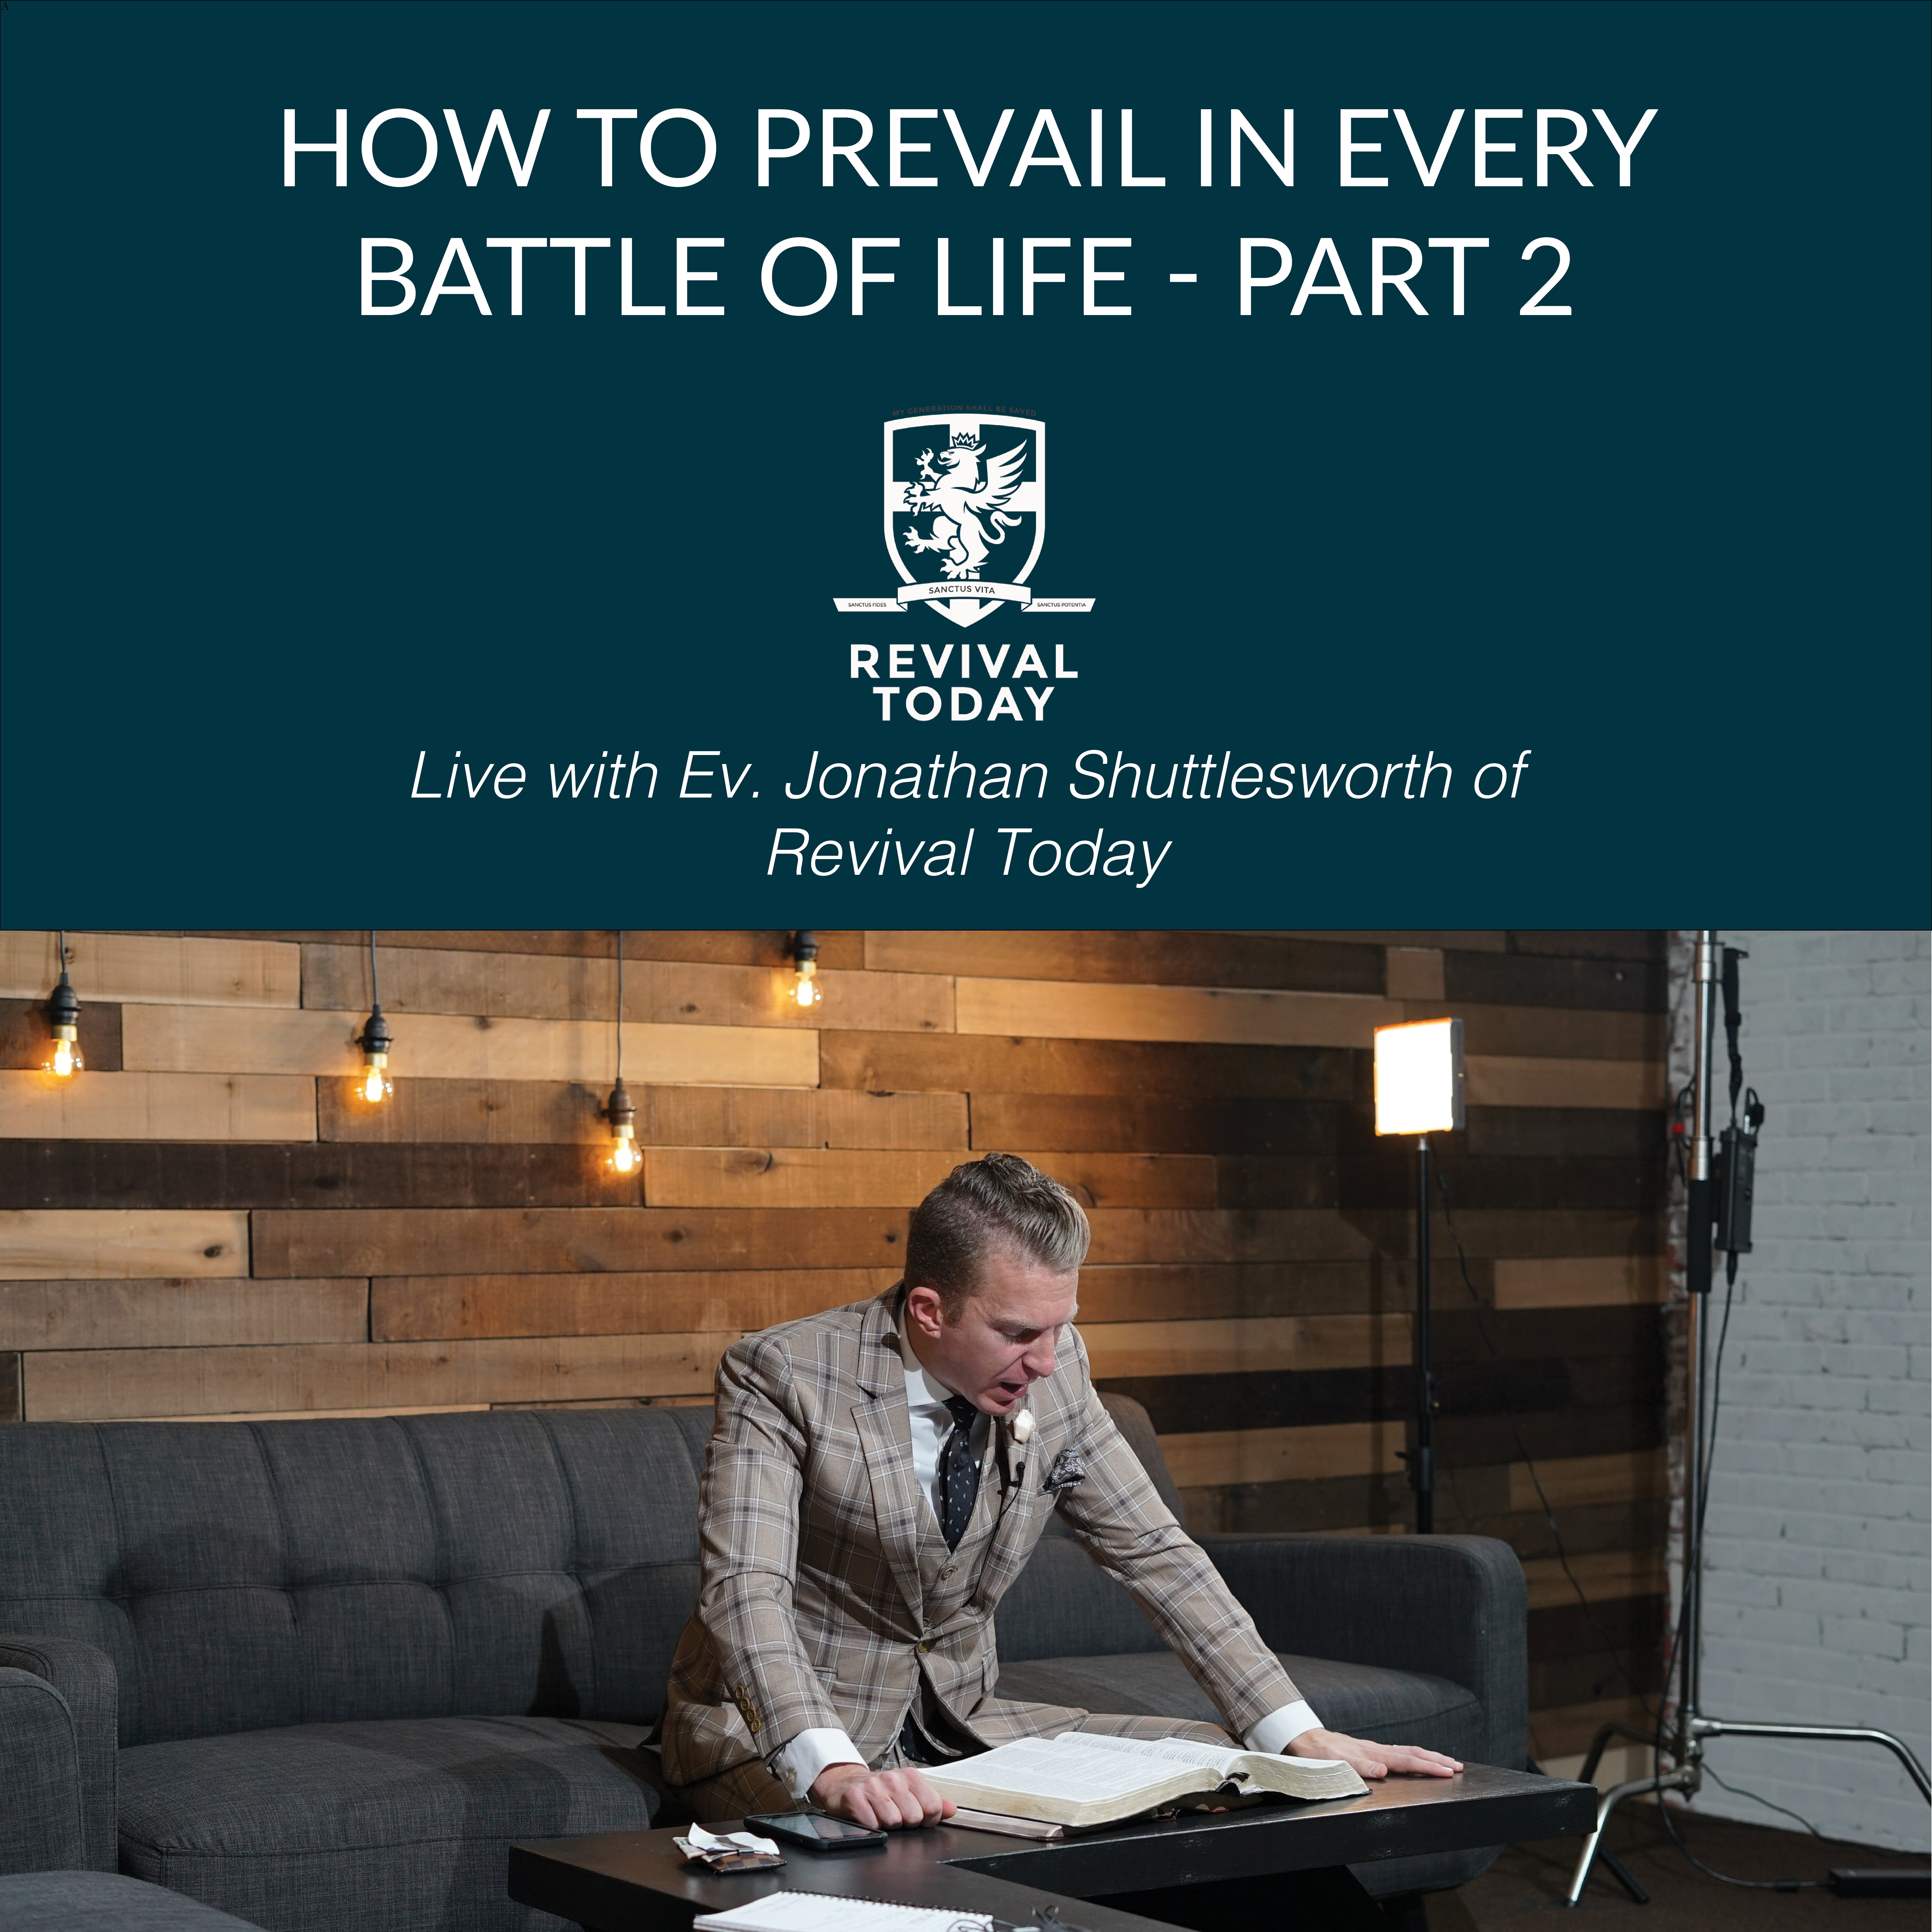 How to Prevail in Every Battle of Life with Jonathan Shuttlesworth